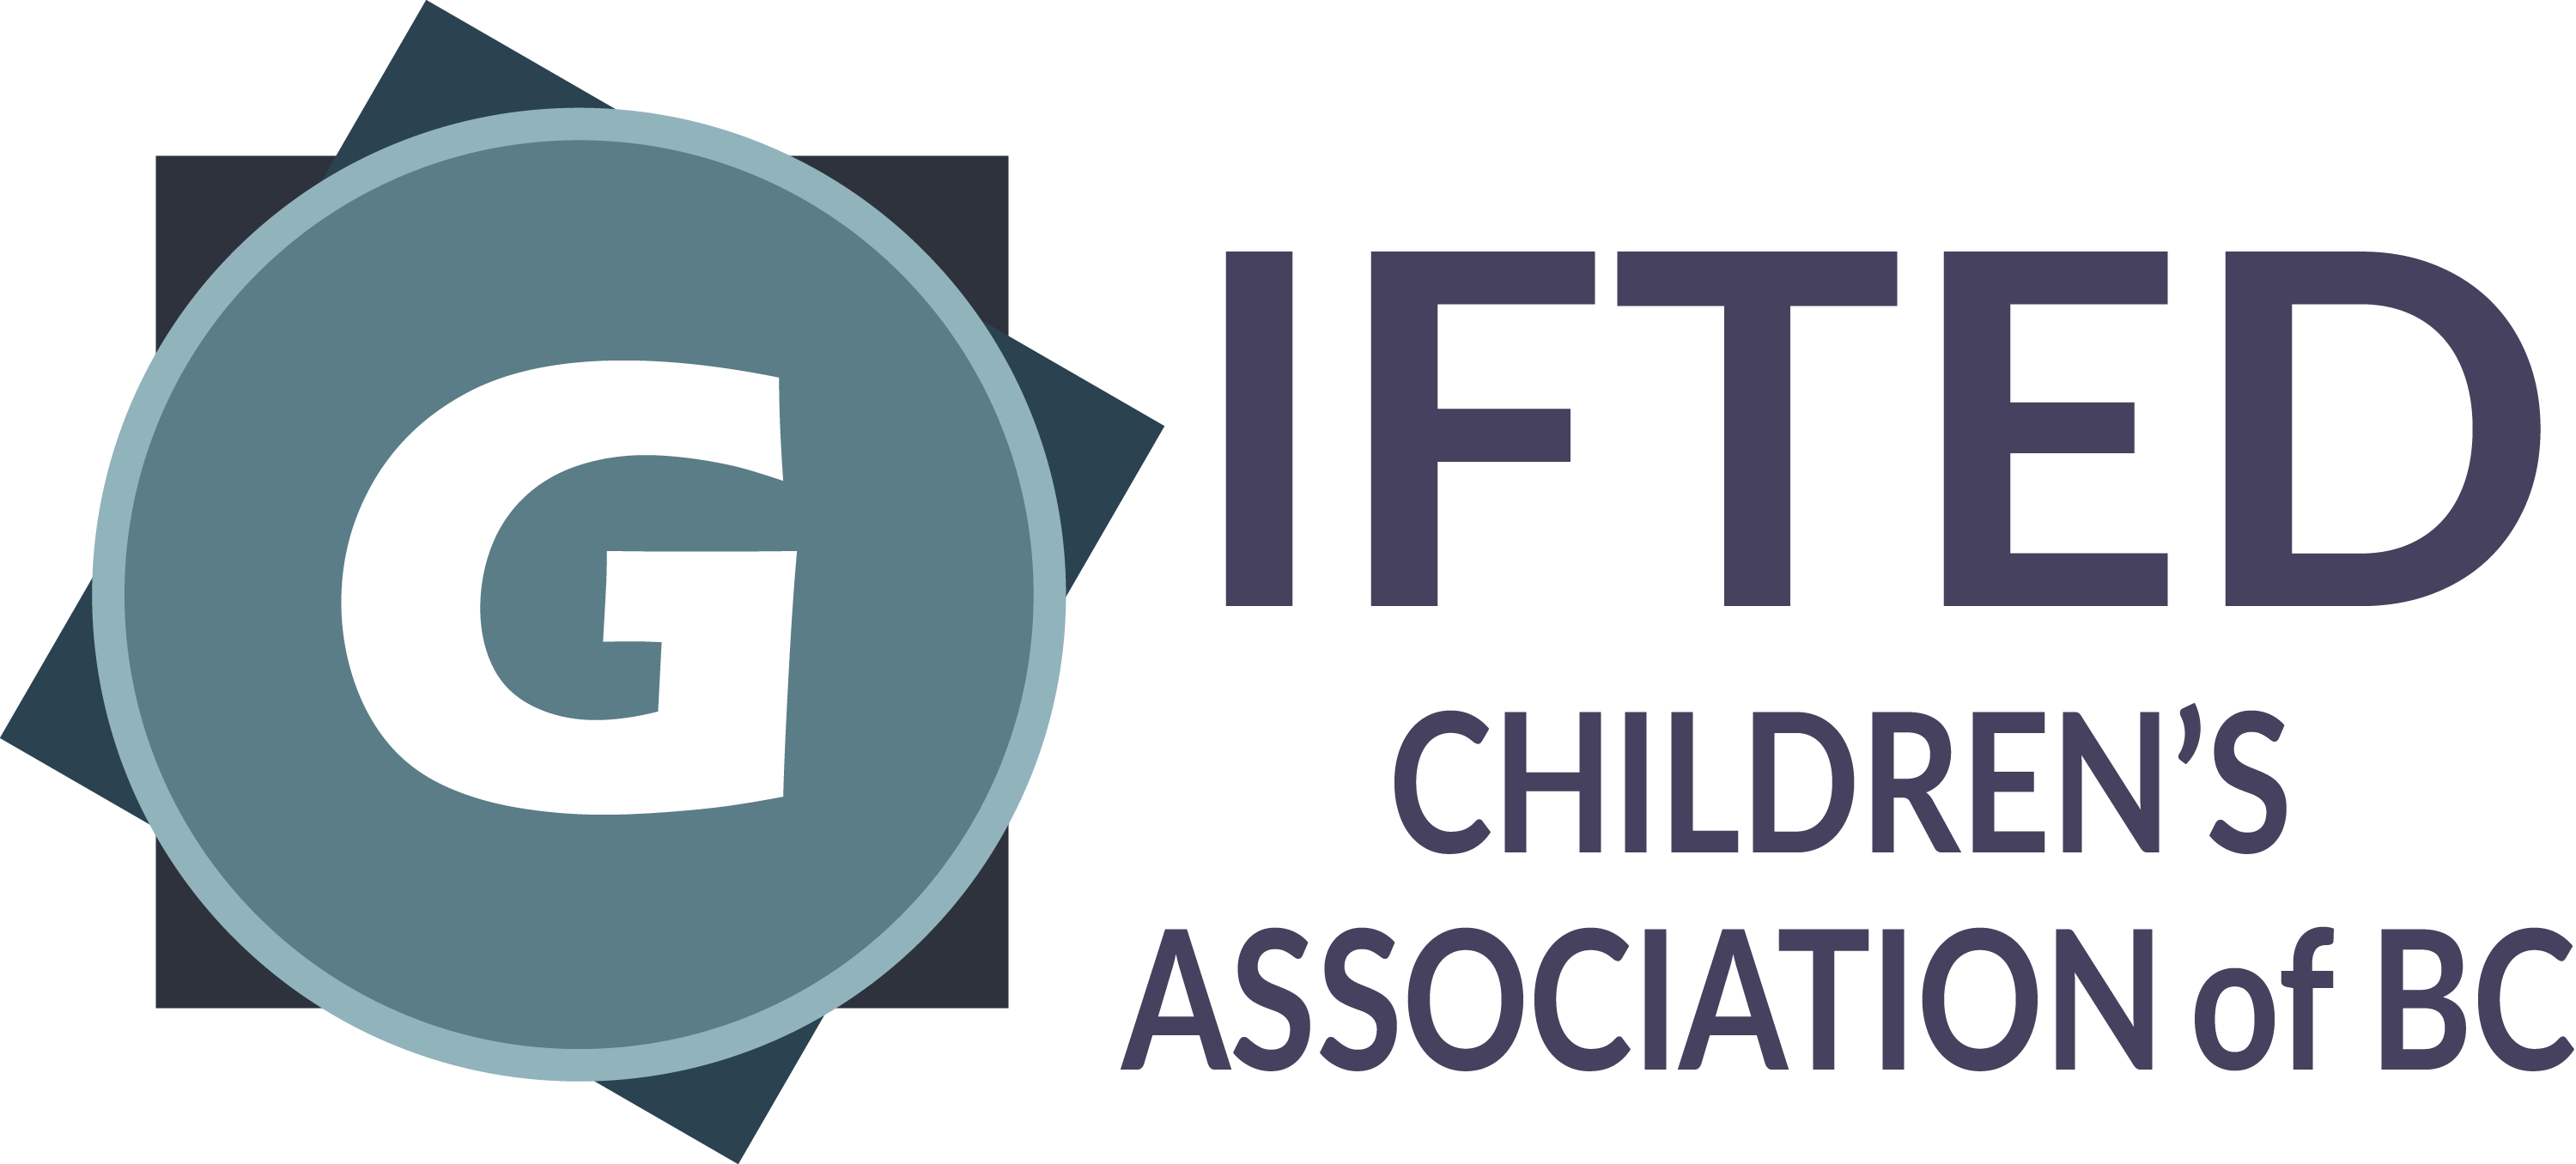 Gifted Children's Association of British Columbia